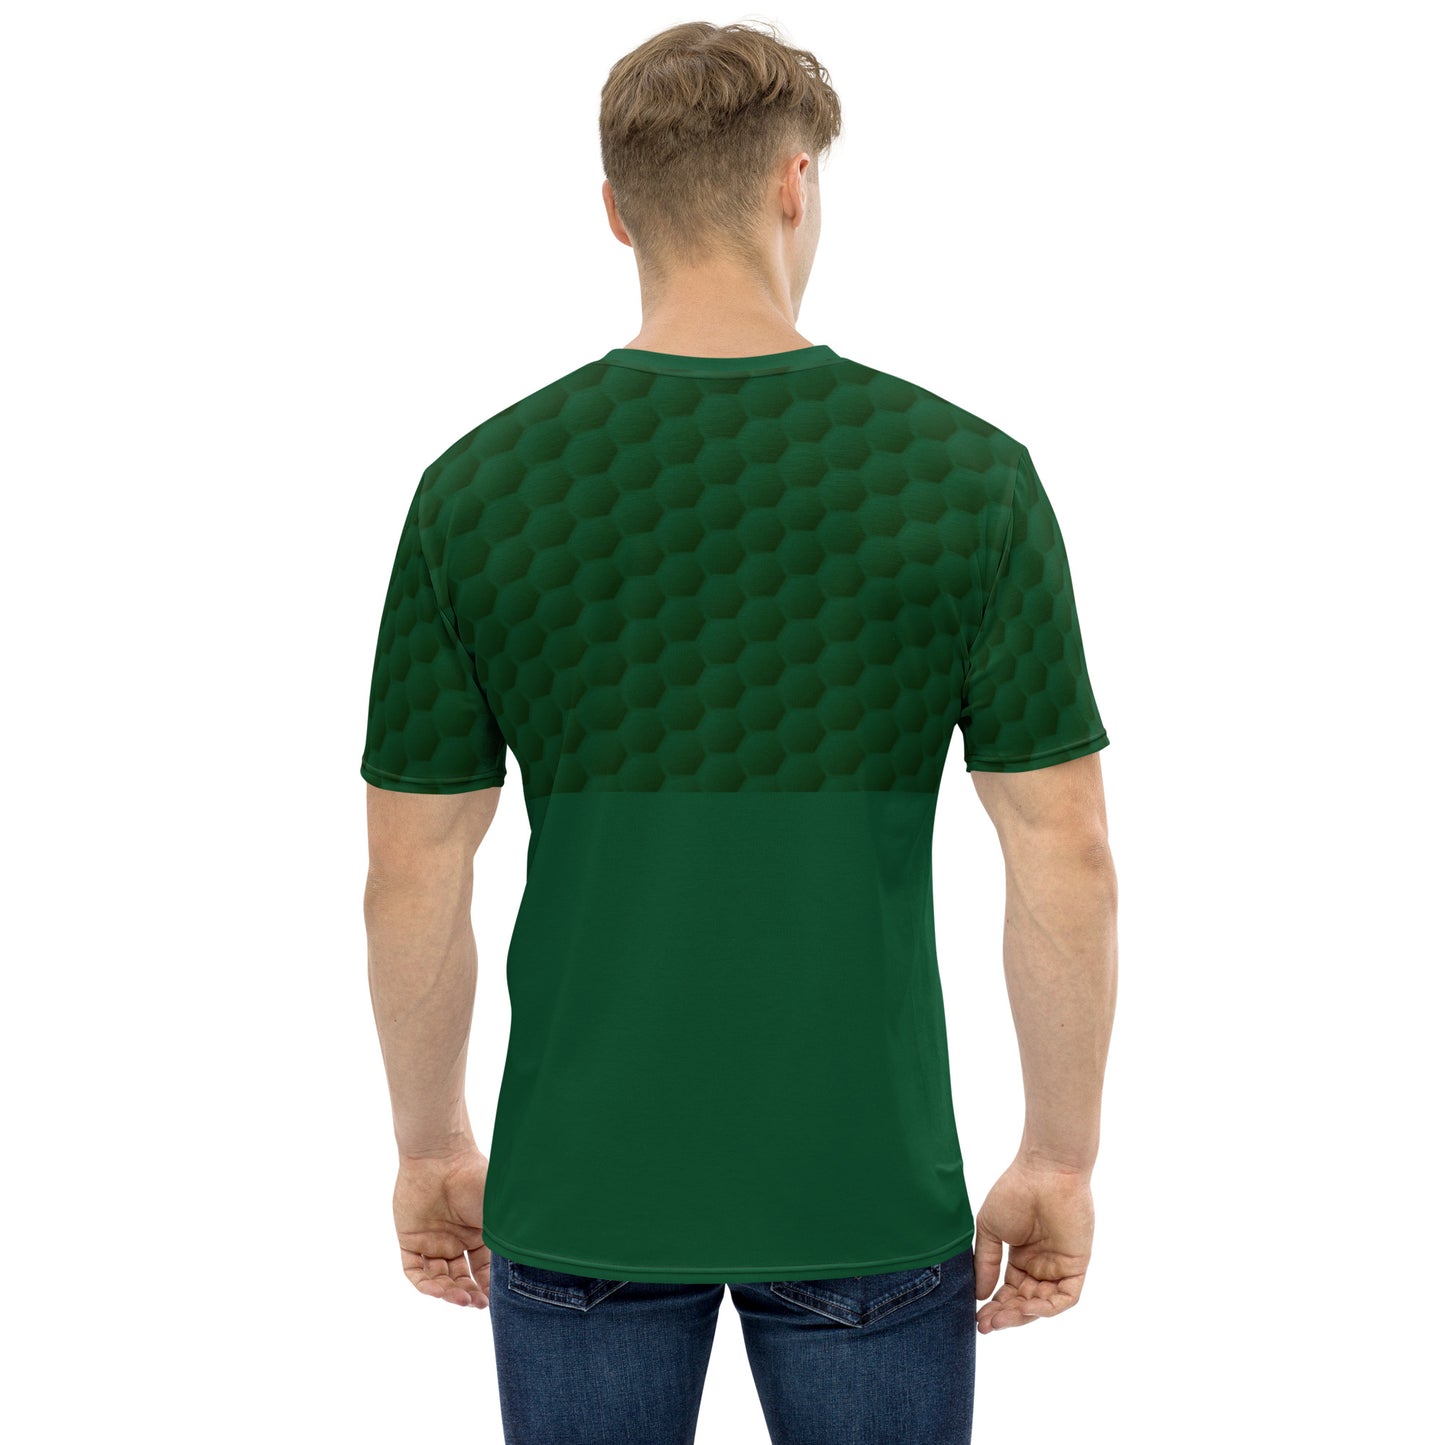 Golf Course TShirt is a Creative Golf Graphic design for Men